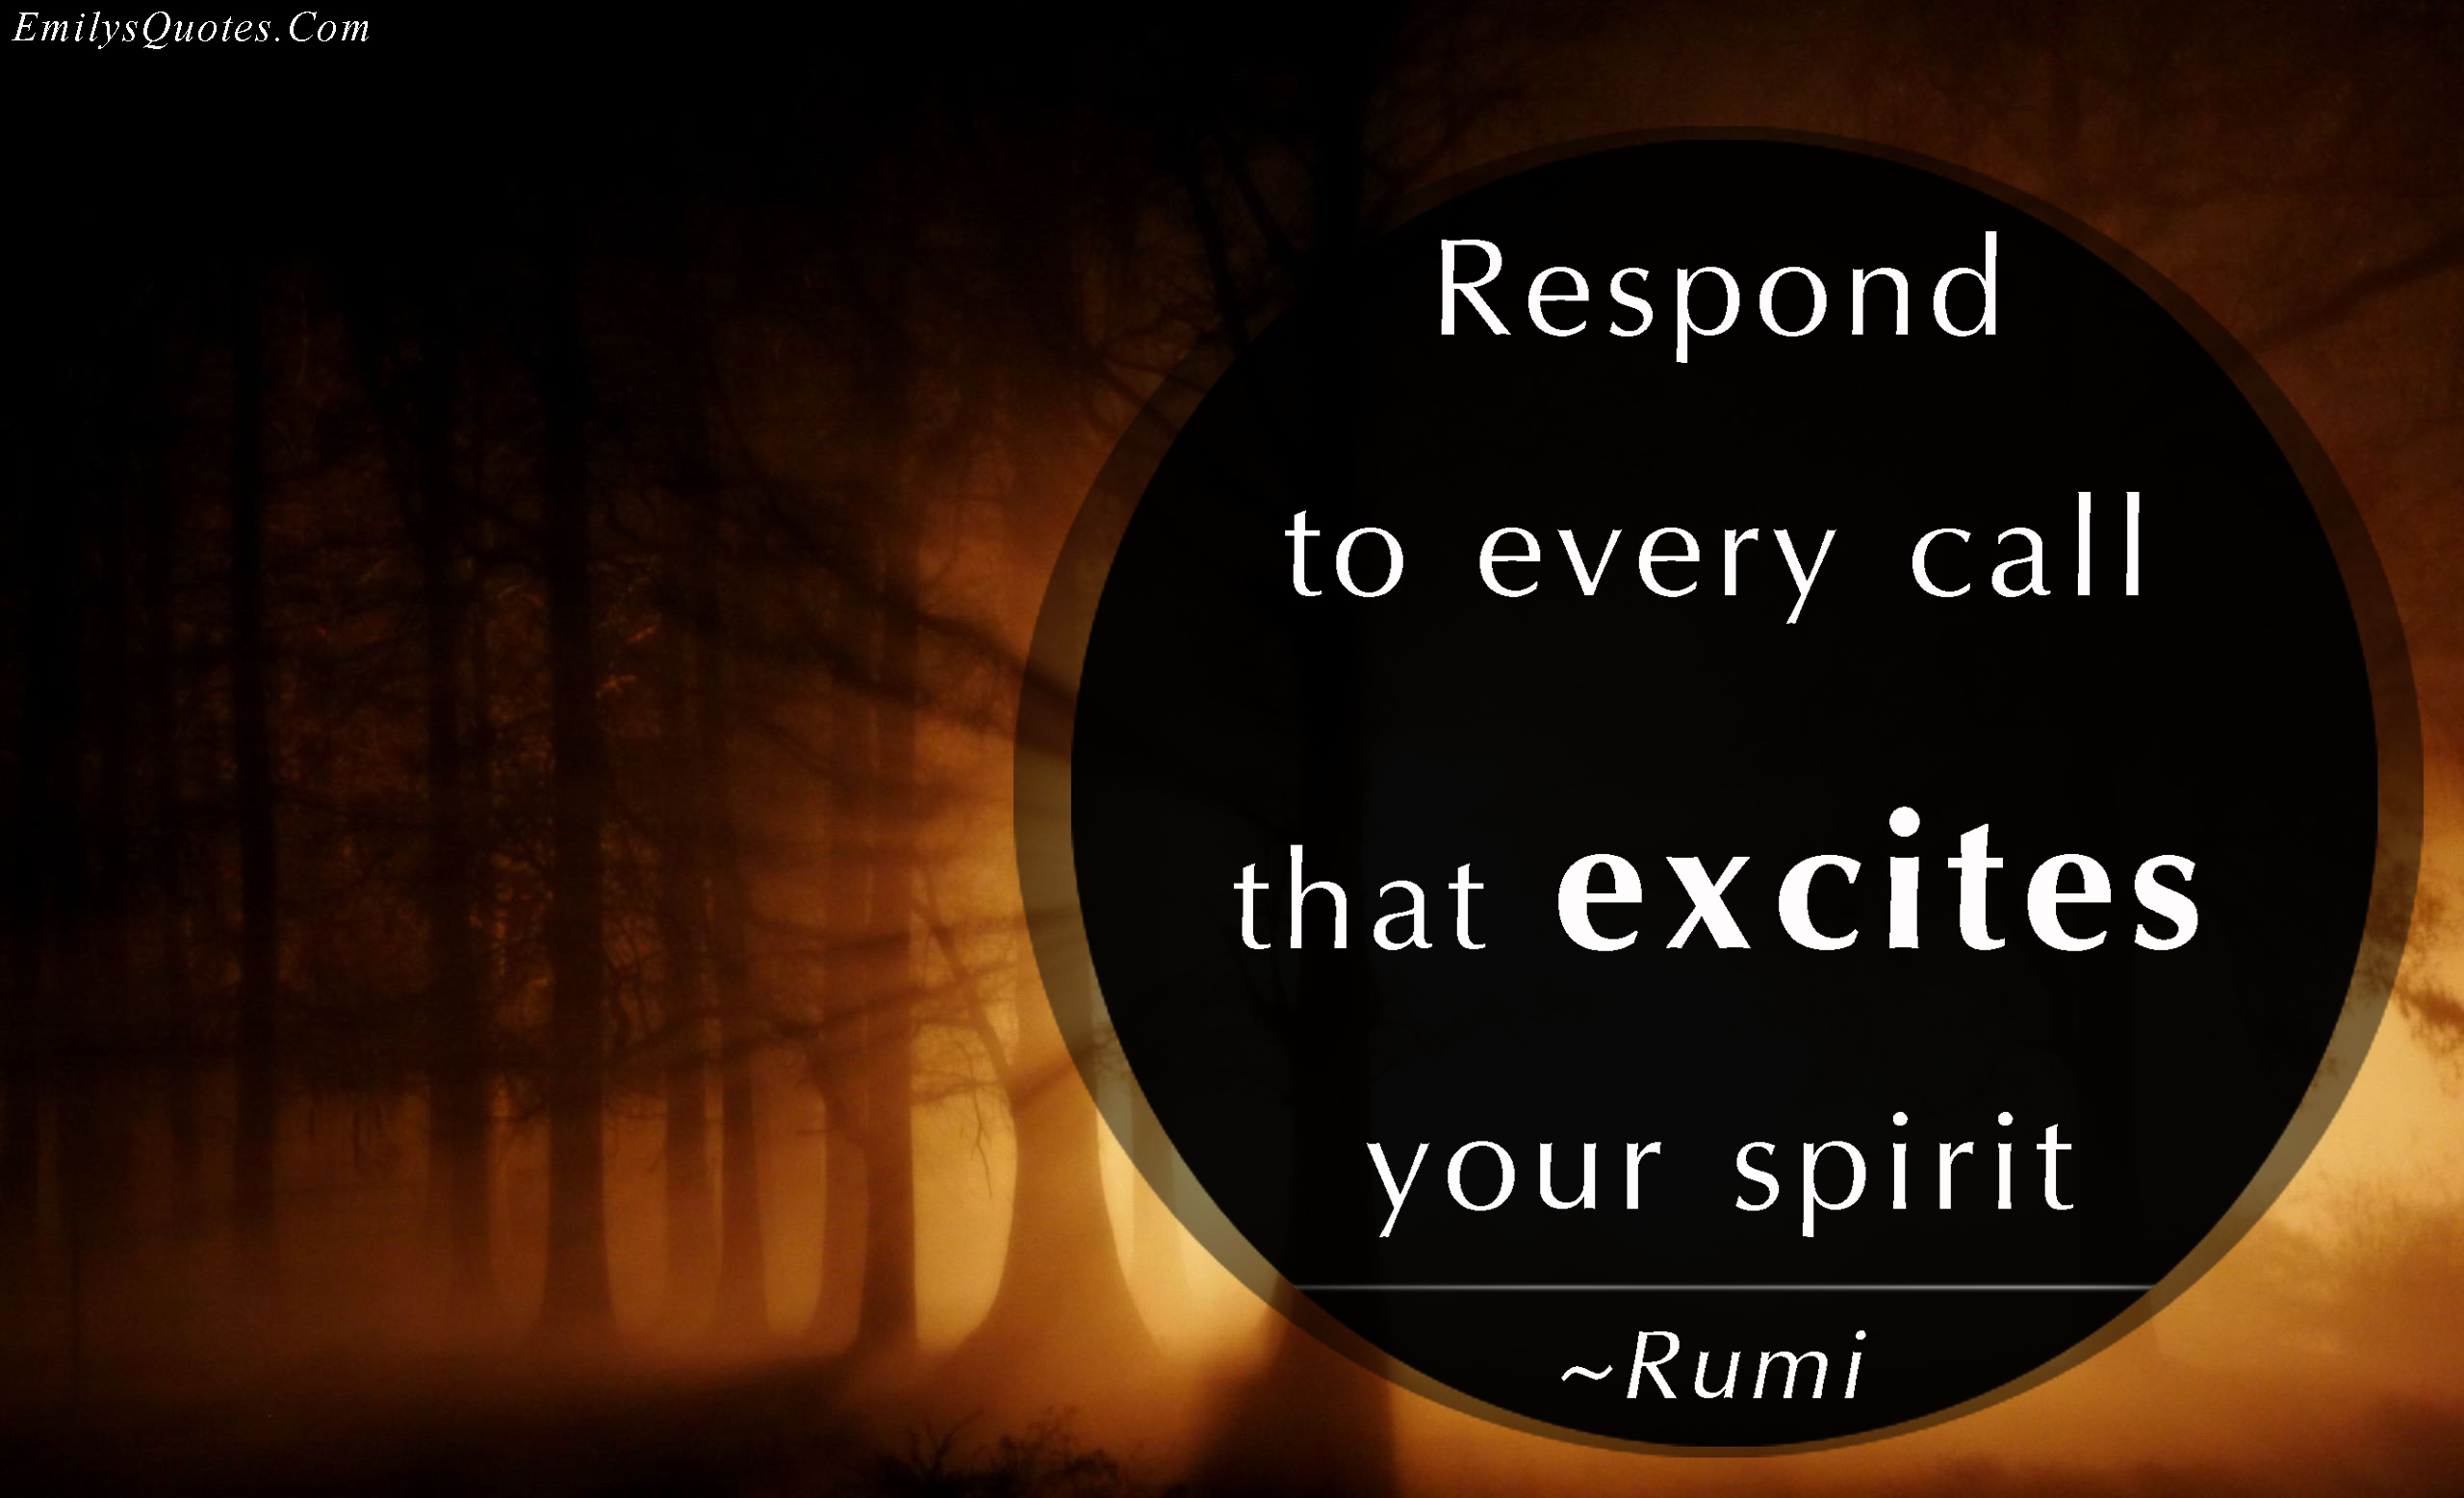 Respond to every call that excites your spirit